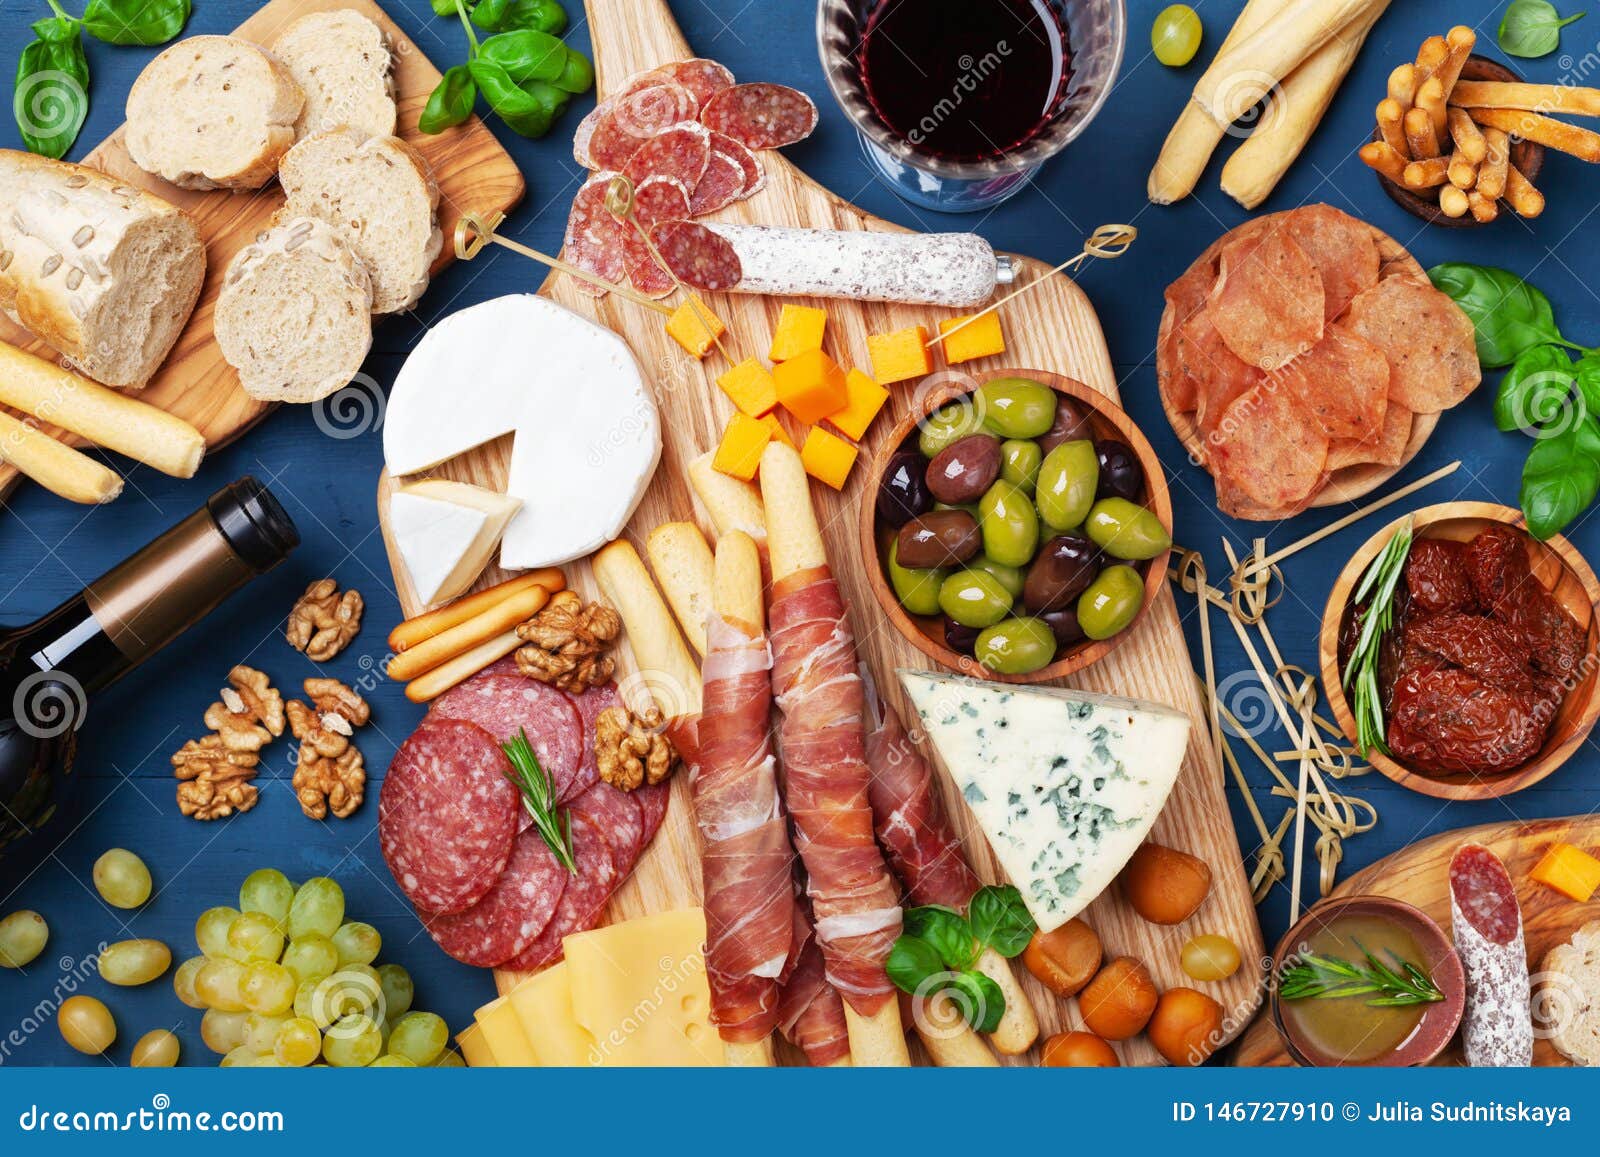 italian appetizers or antipasto set with gourmet food on kitchen table top view. mixed delicatessen of cheese and meat snacks